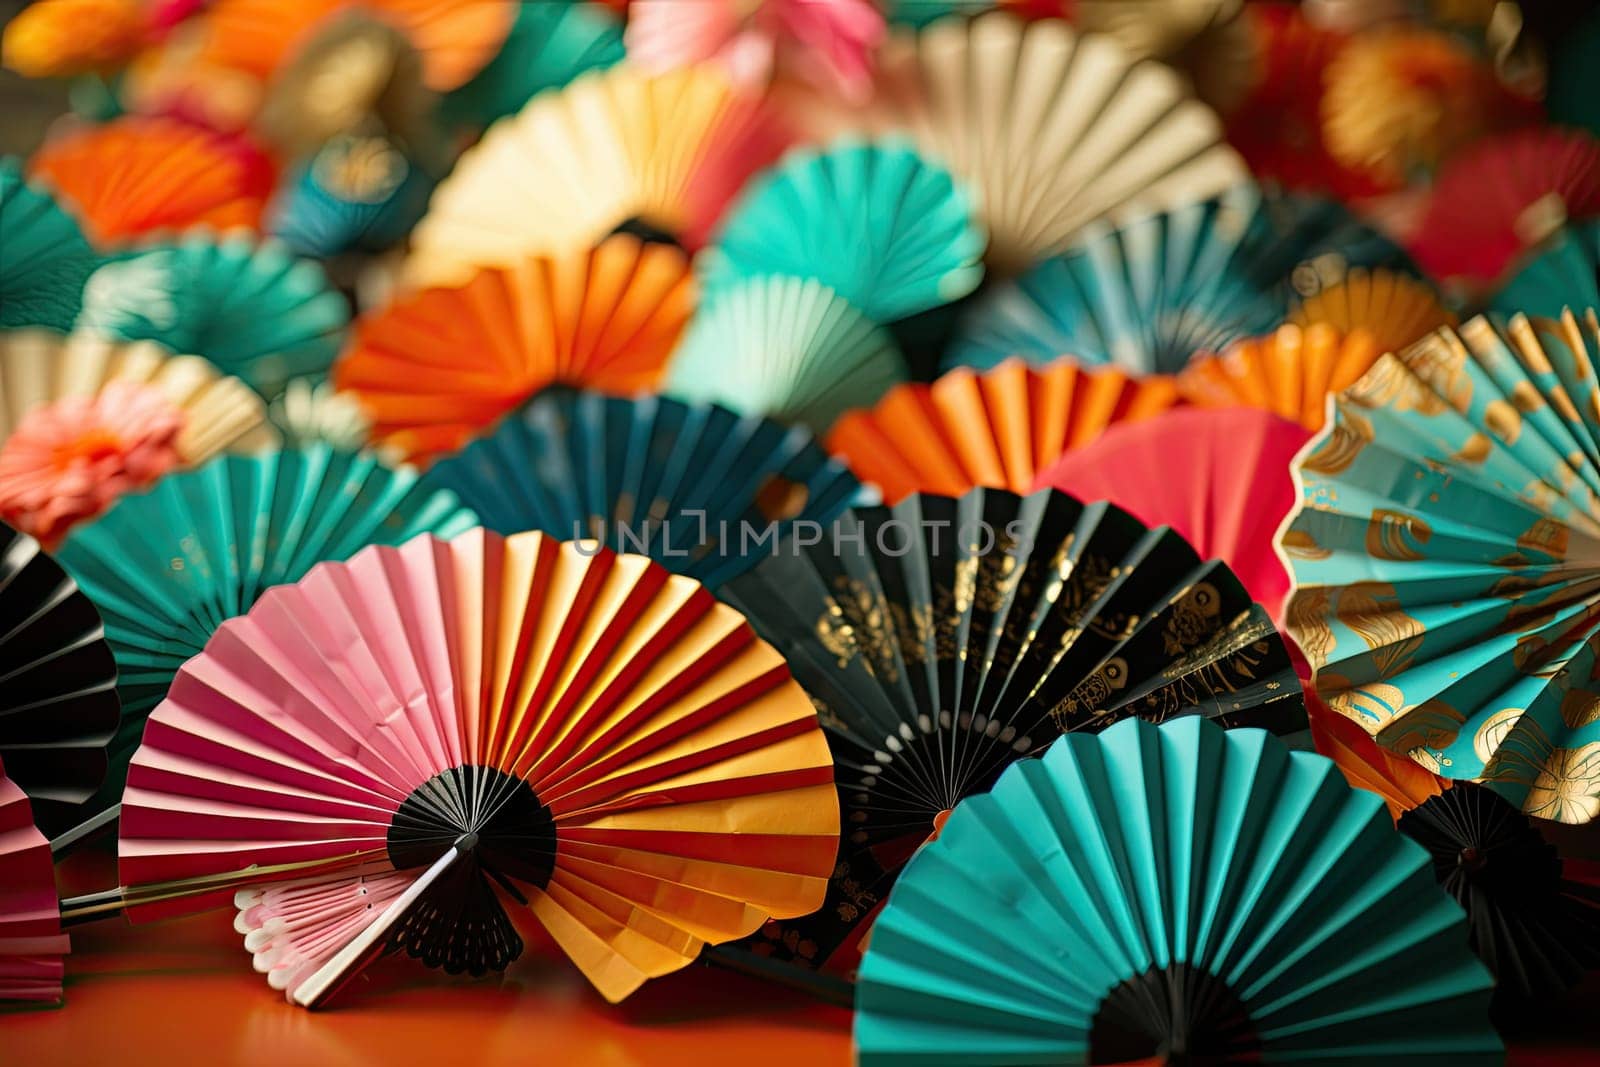 A Vibrant Display of Colorful Paper Fans Adorning a Table Created With Generative AI Technology